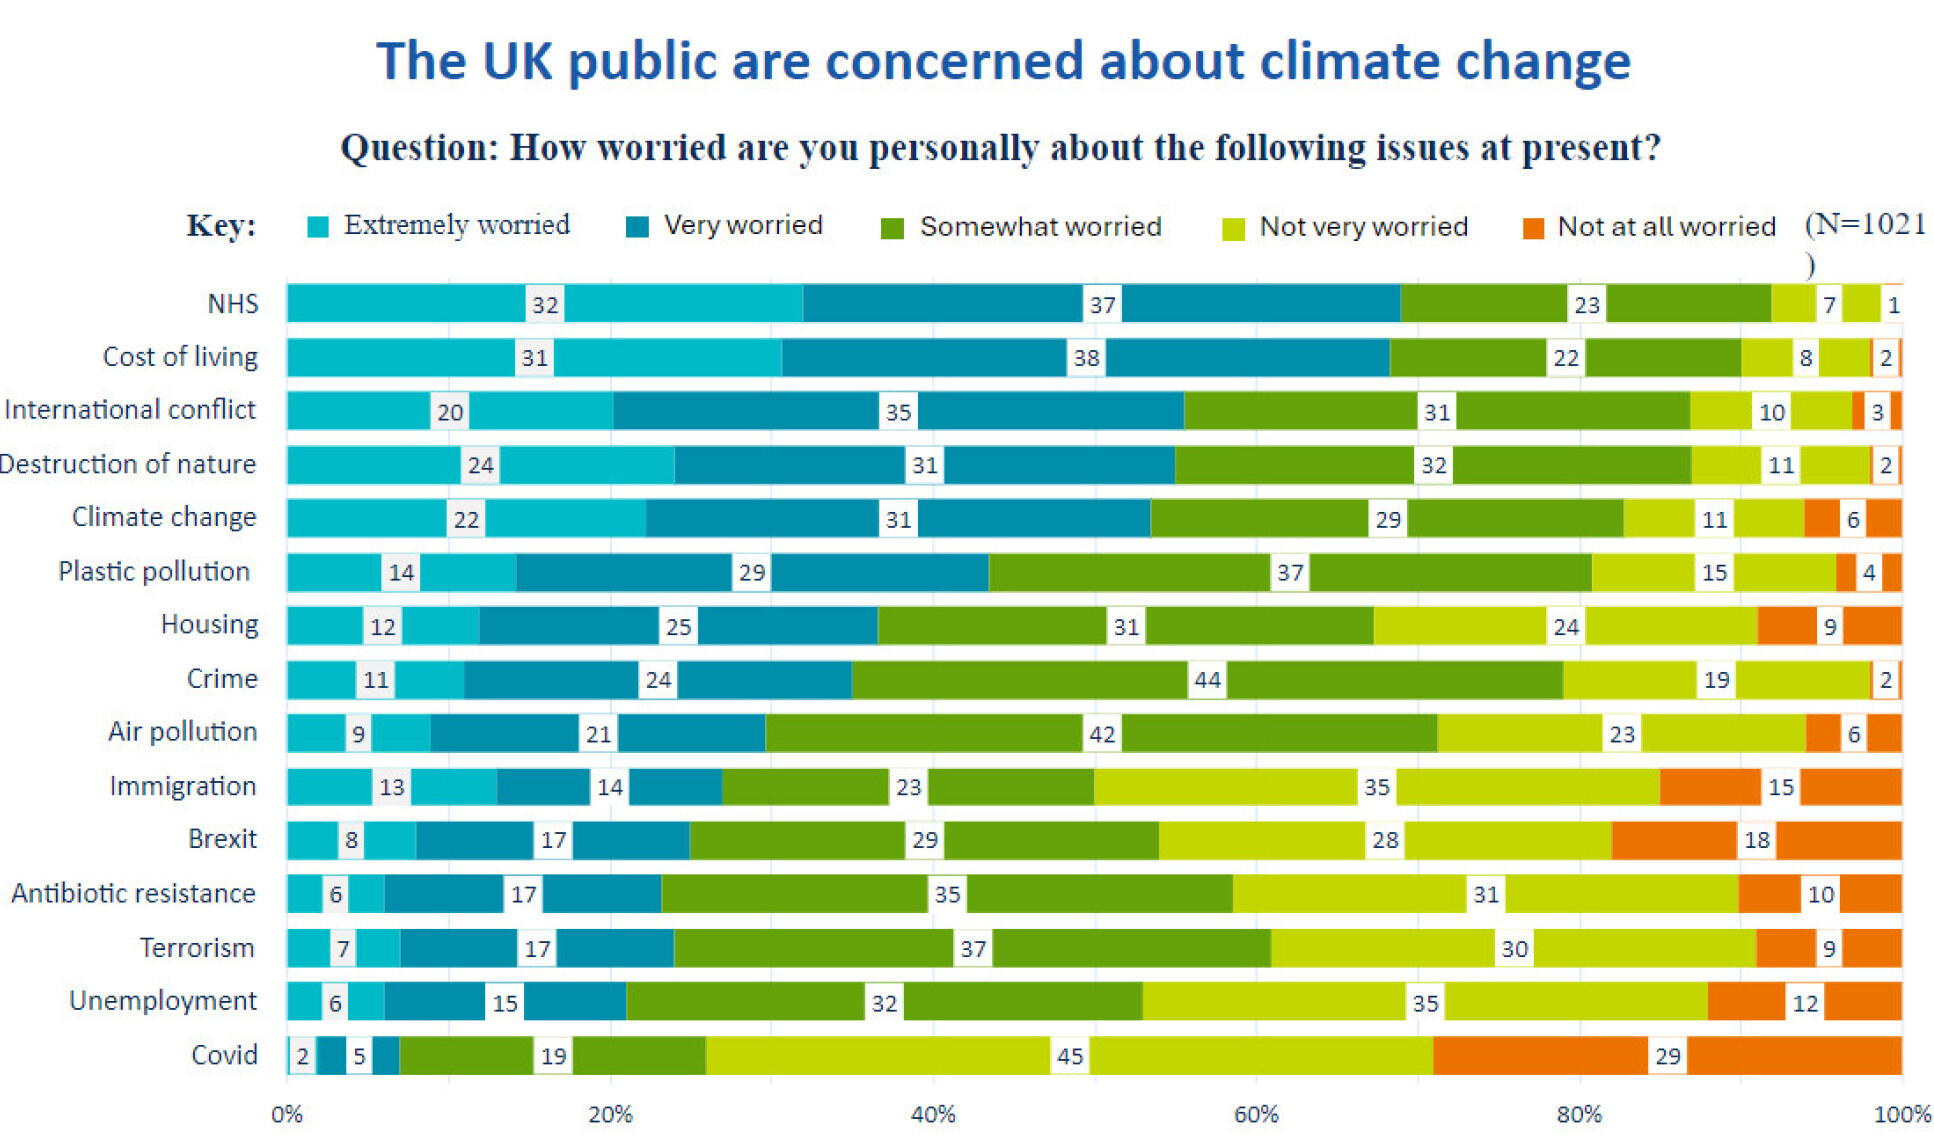 A graph showing levels of concern for various issues in the UK. The NHS ranks as the issue respondents were most concerned about, followed by cost of living, international conflict, destruction of nature and climate change. 